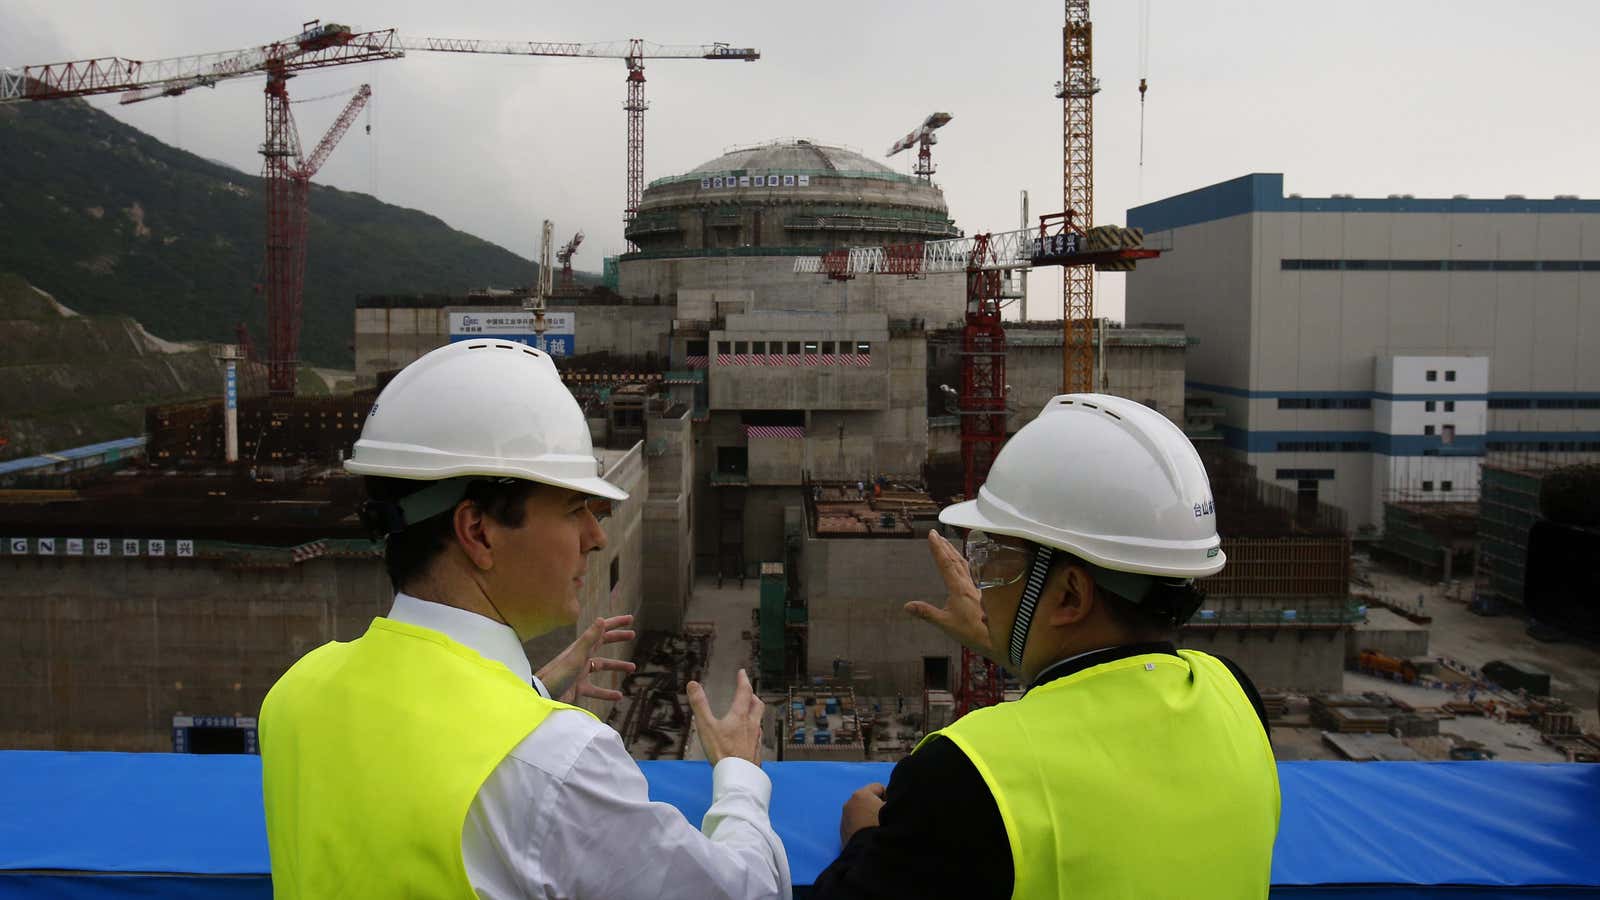 China is building more nuclear power plants than any other country, in order to fulfill its new climate pledge.